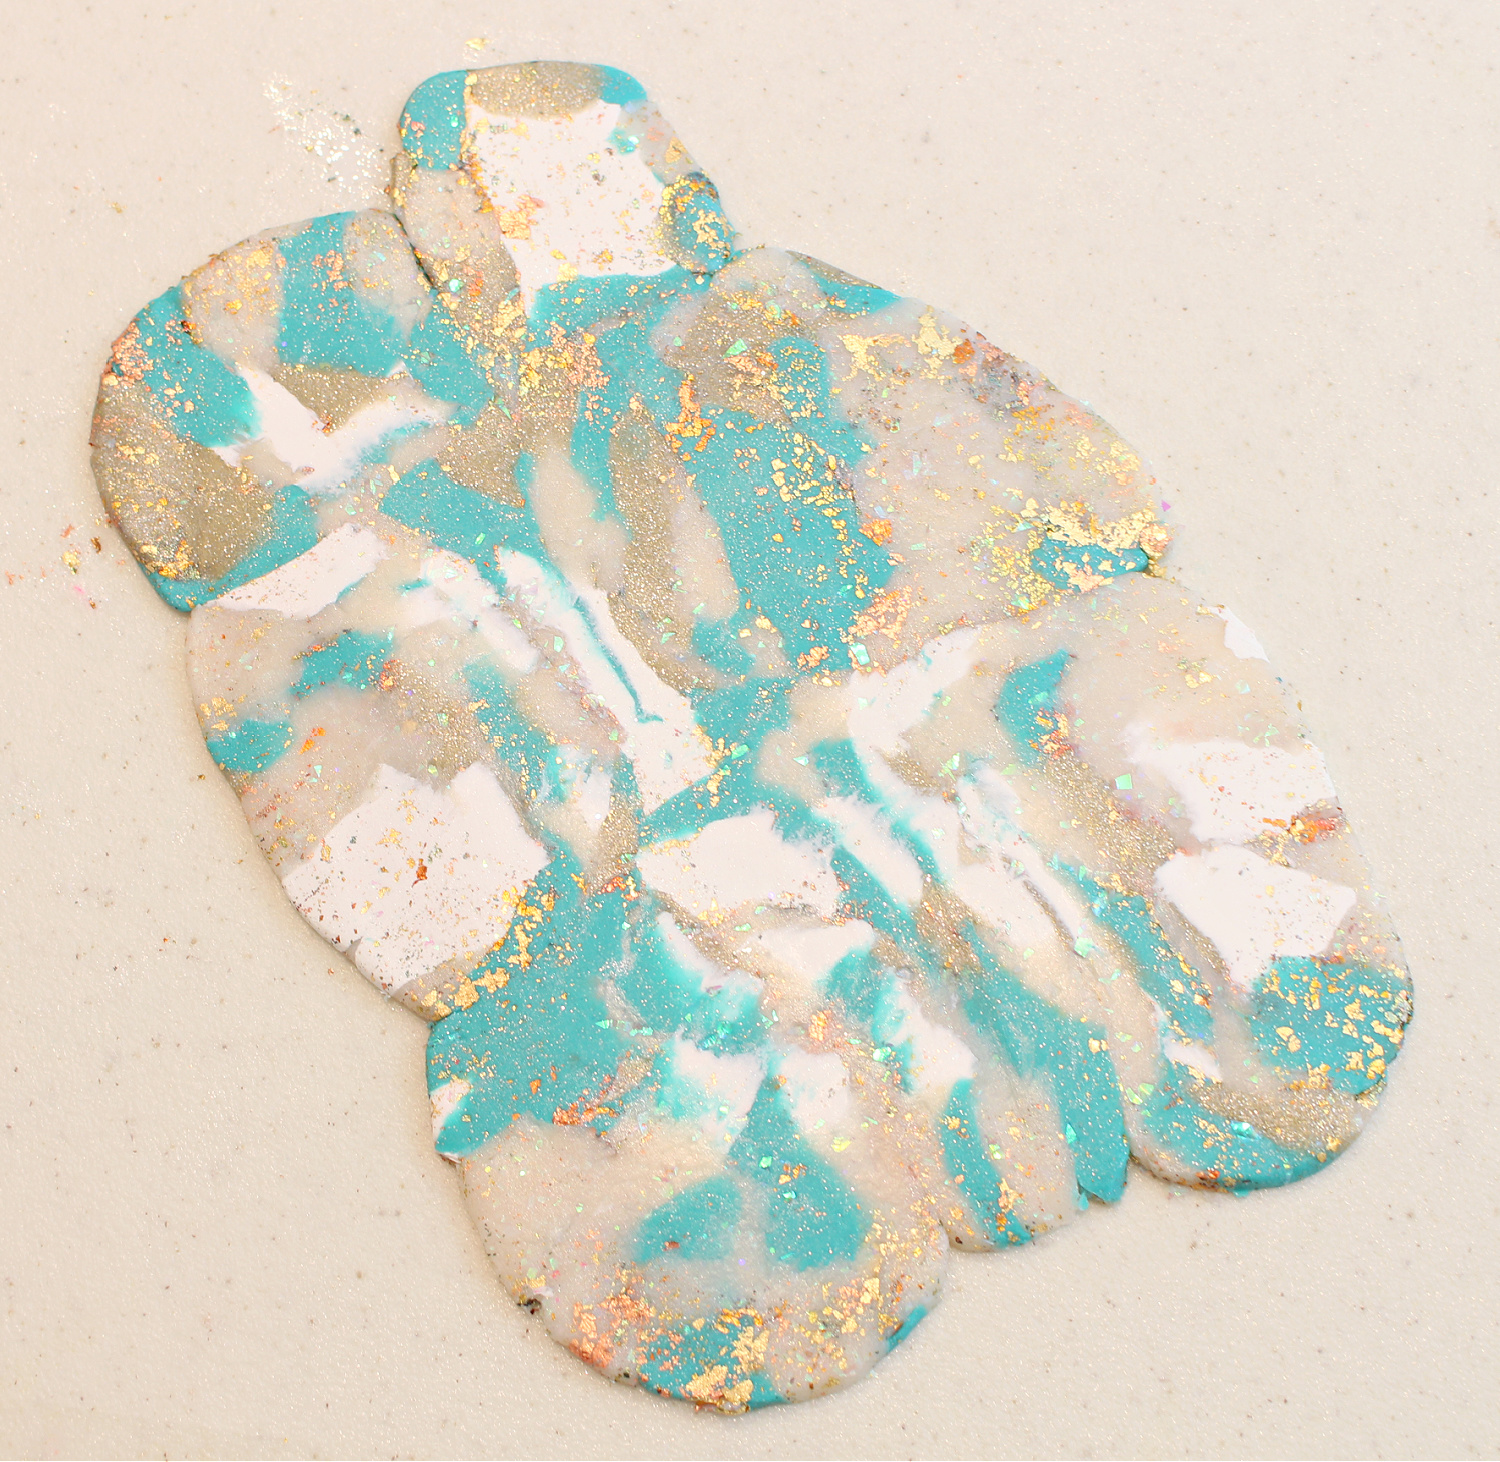 Making Marbled Designs in Sculpey Clay